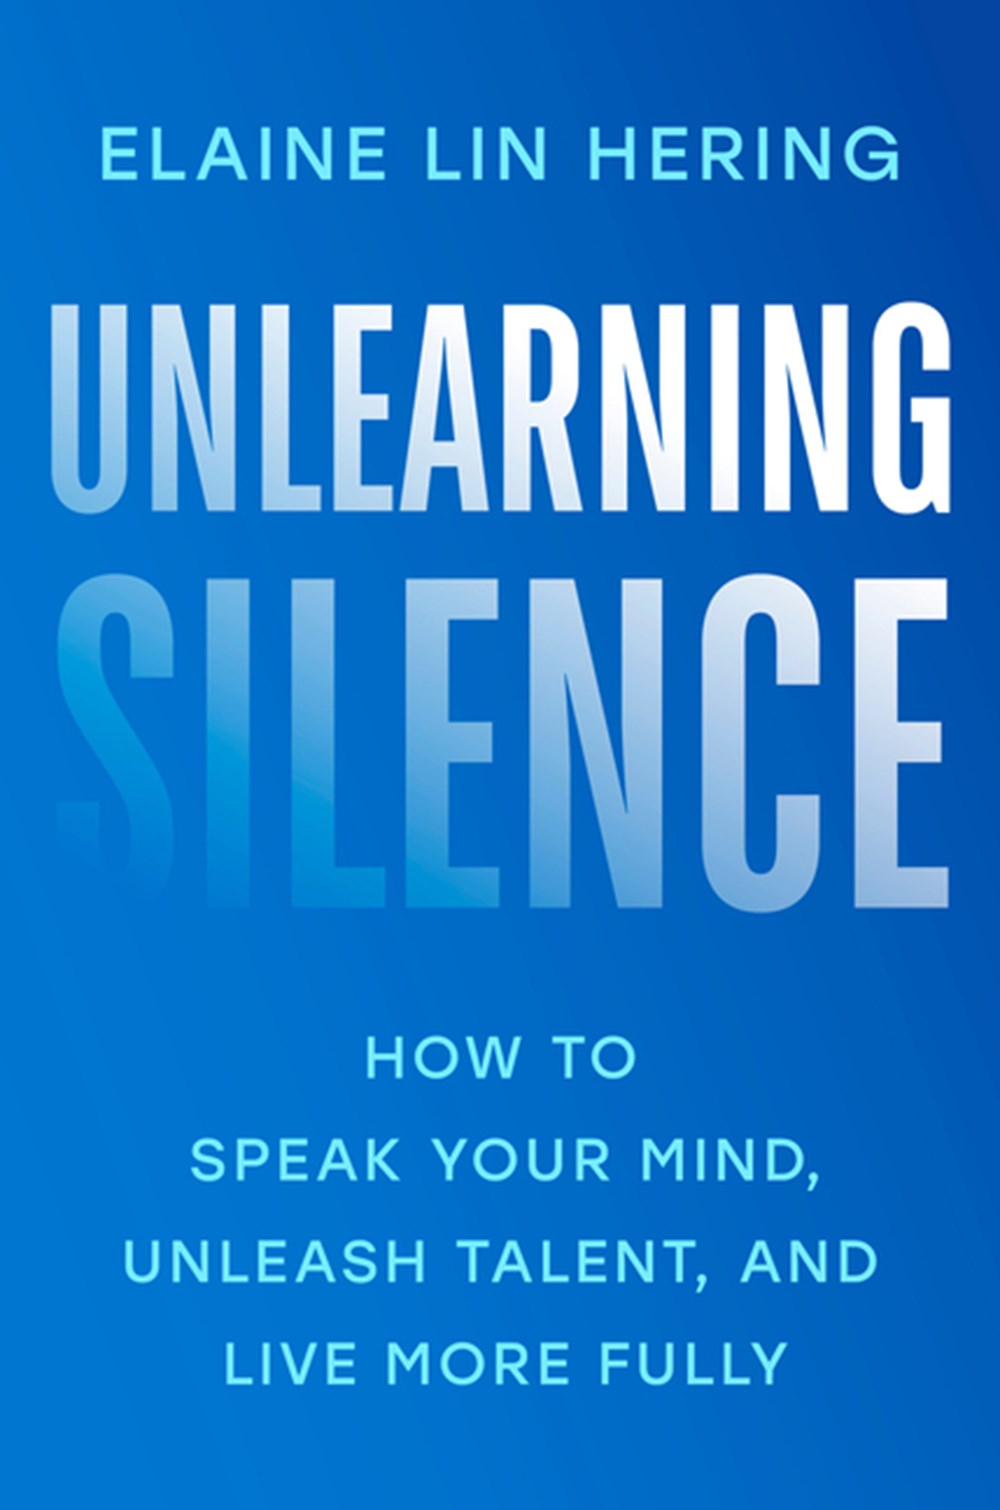 Unlearning Silence How to Speak Your Mind, Unleash Talent, and Live More Fully